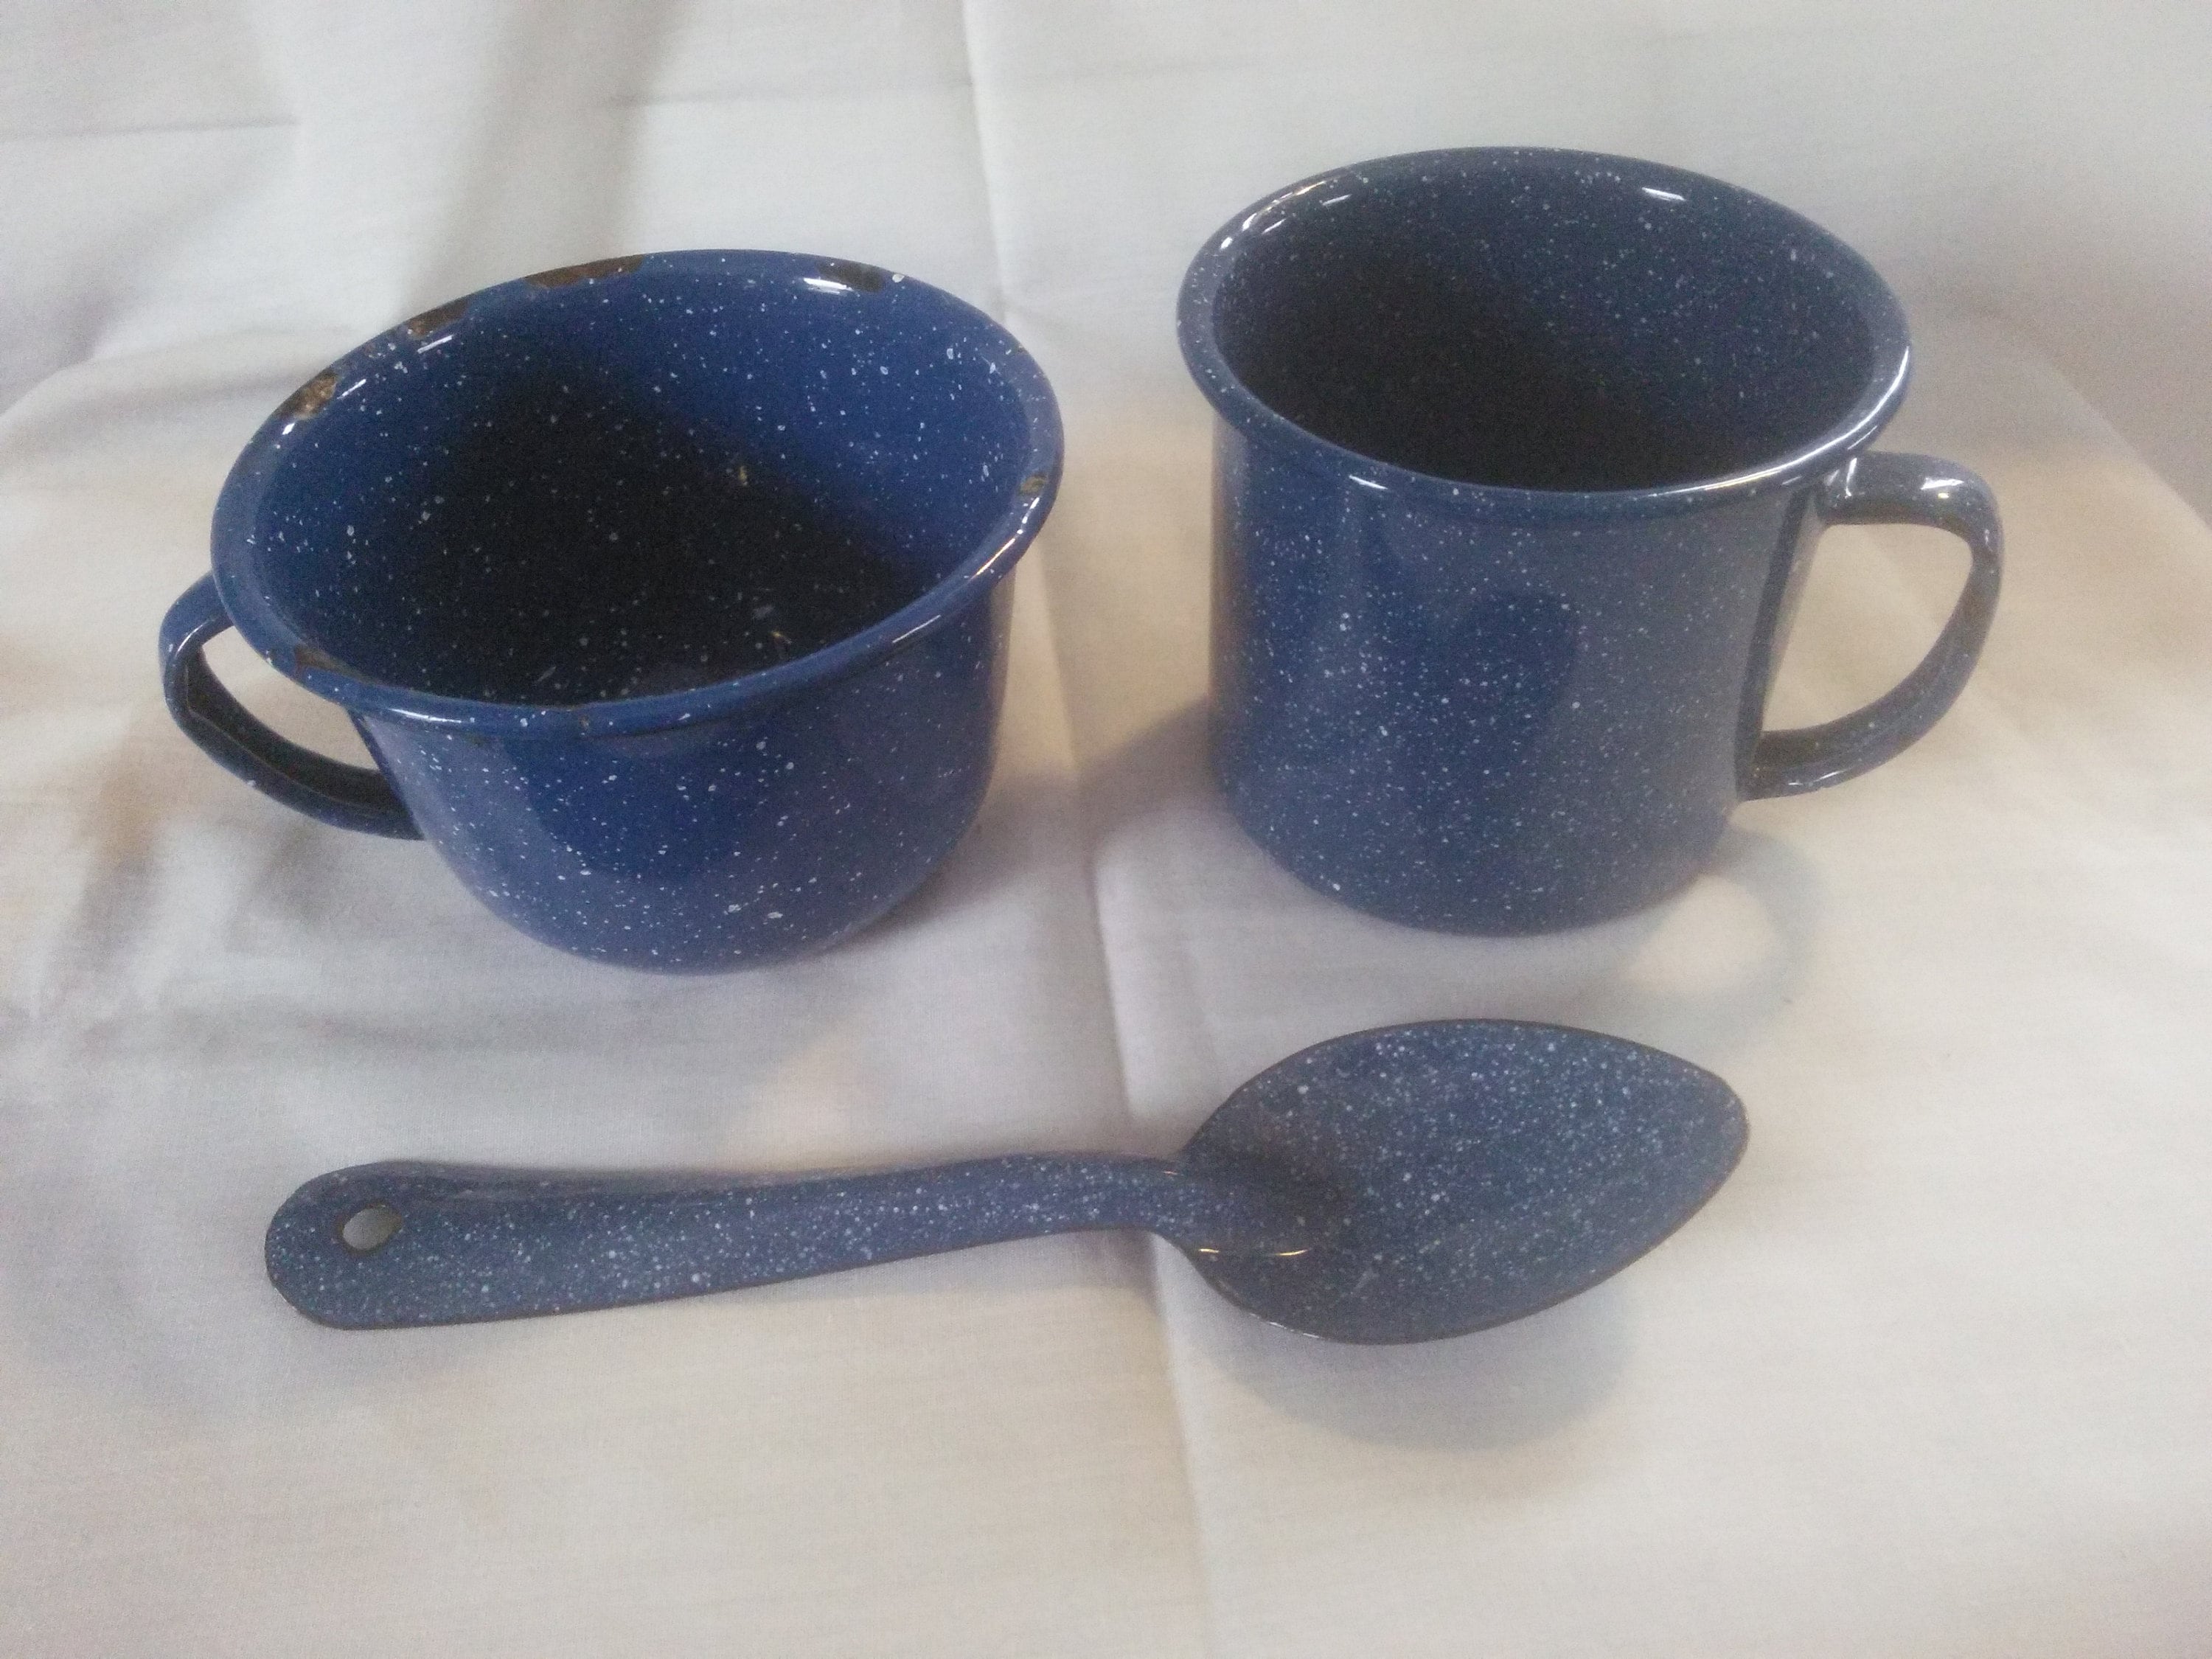 Made in Saltillo Mexico Blue Enamel Cups Vintage Blue Speckled Enamel Coffee Cups Made by Cinsa Mexican Enamelware